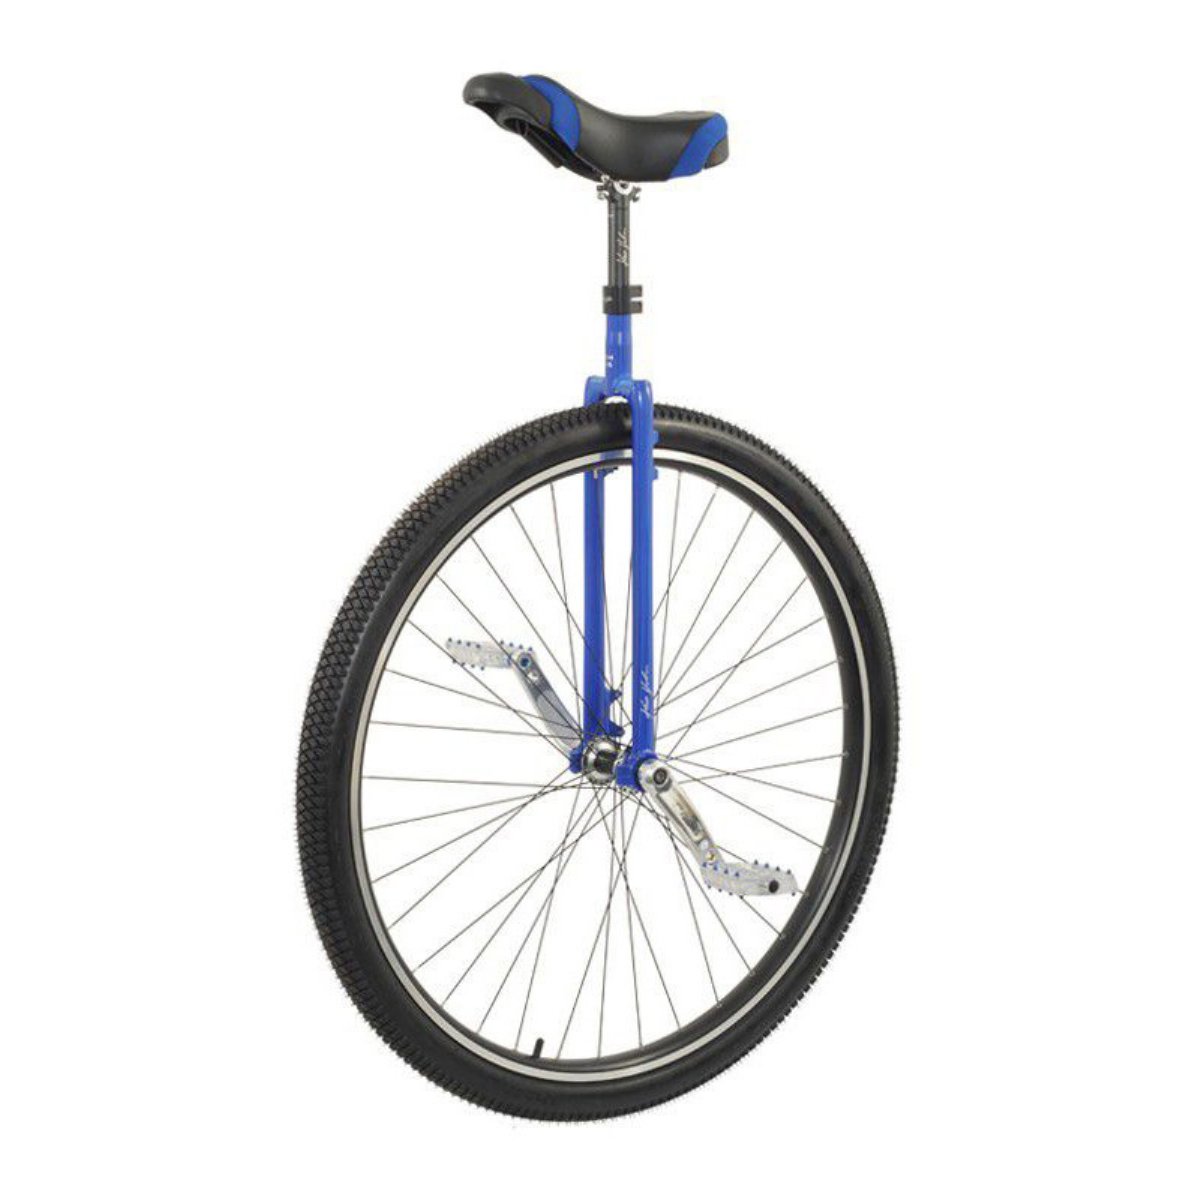 Kris Holm 36 Inch Road Unicycle - Unicycles at Hayneedle - ClipArt ...